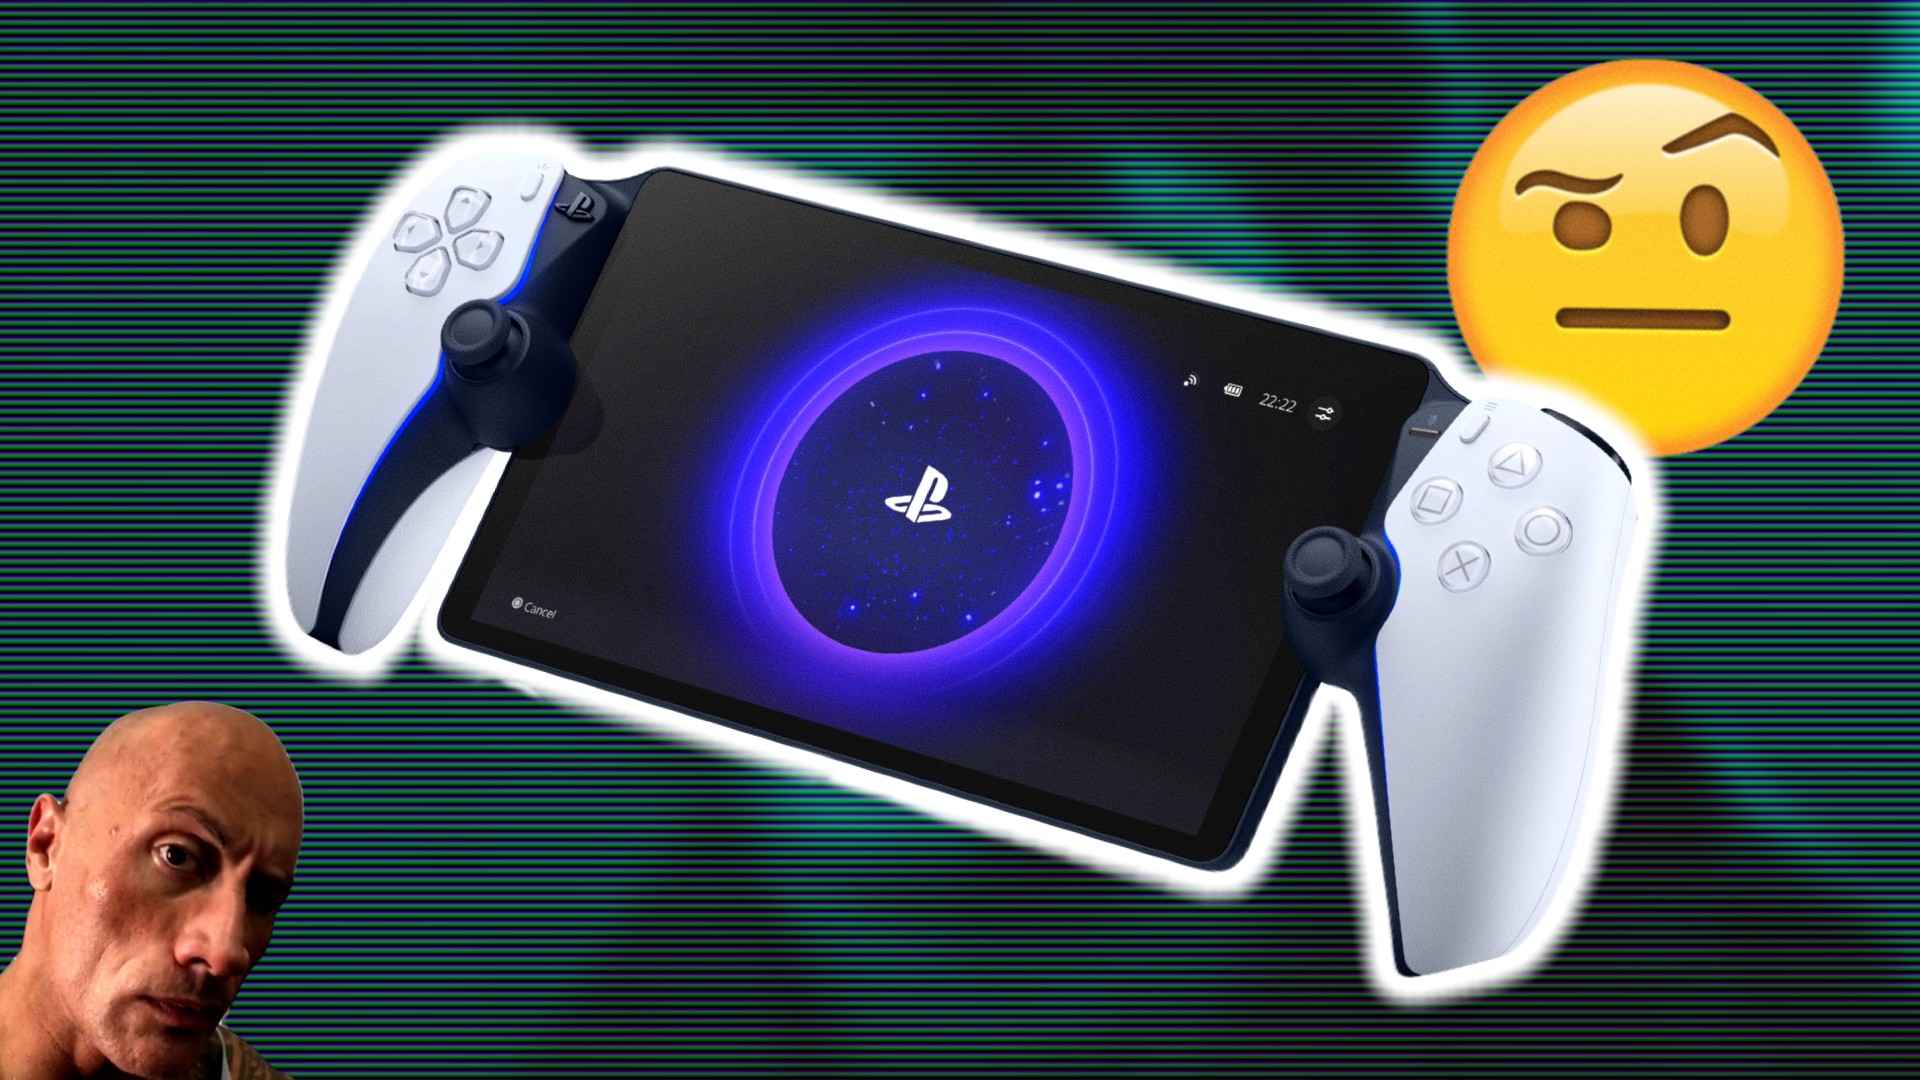 PlayStation Portal: Price, Specifications and How to Buy